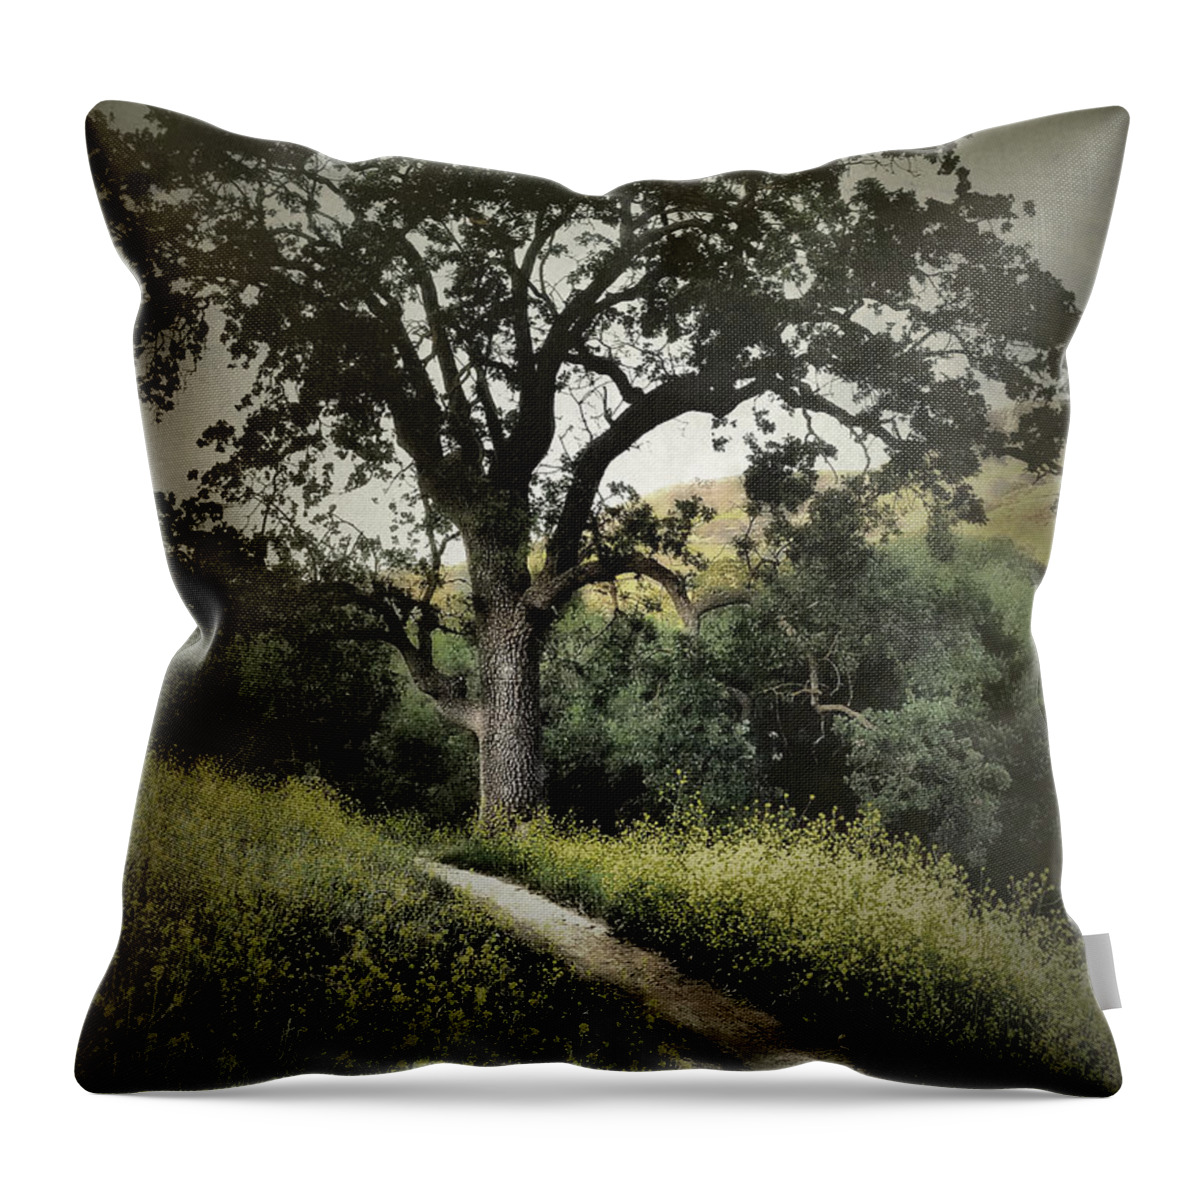 California Throw Pillow featuring the photograph The Old Chumash Trail by Parrish Todd